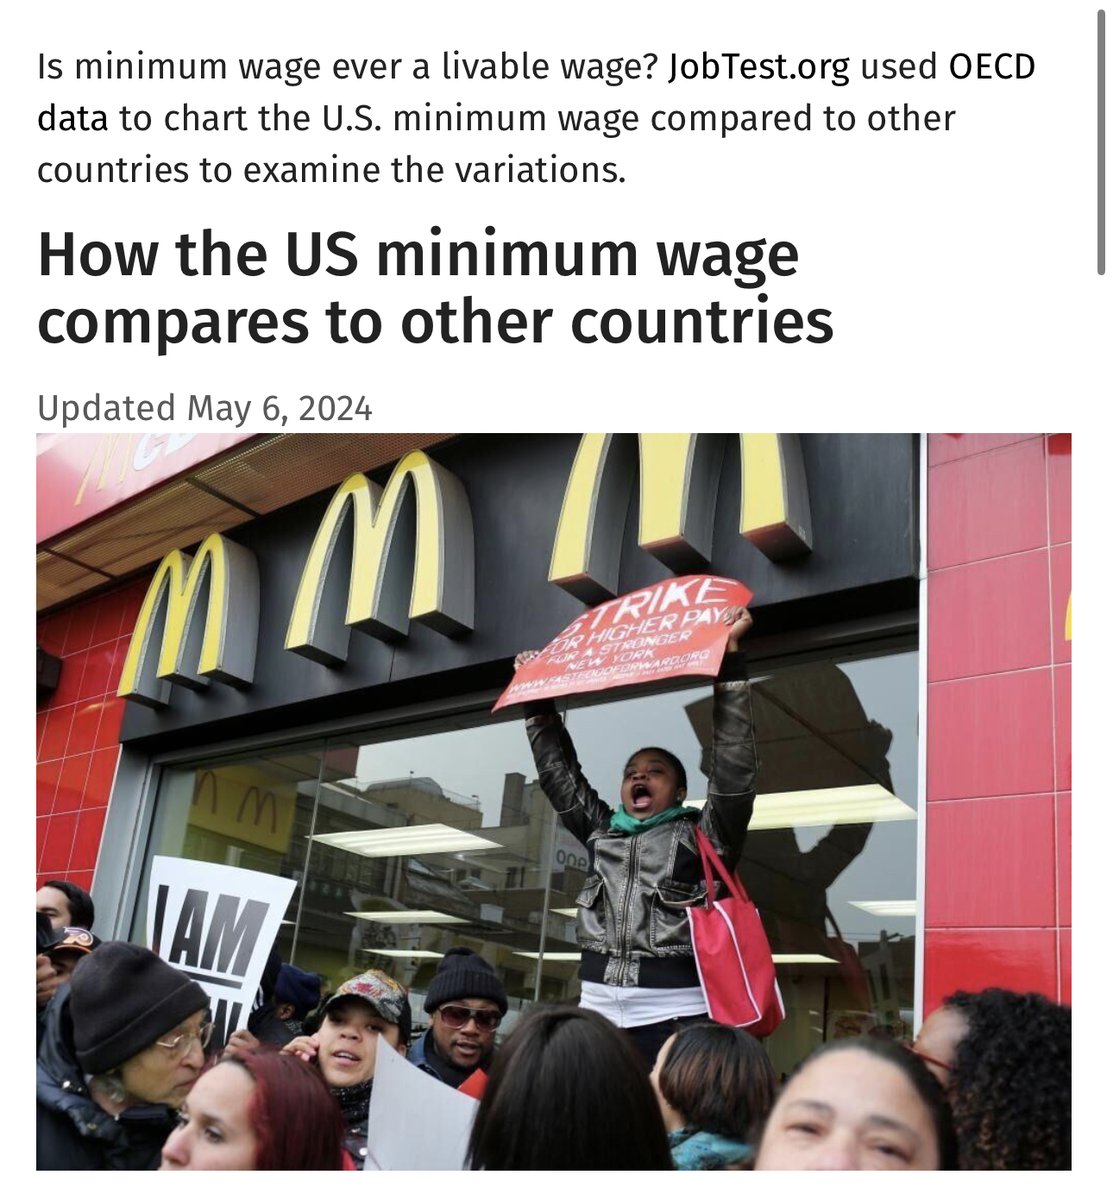 Isn't it wild that the U.S. federal minimum wage hasn't budged in over a decade while other countries keep raising theirs?